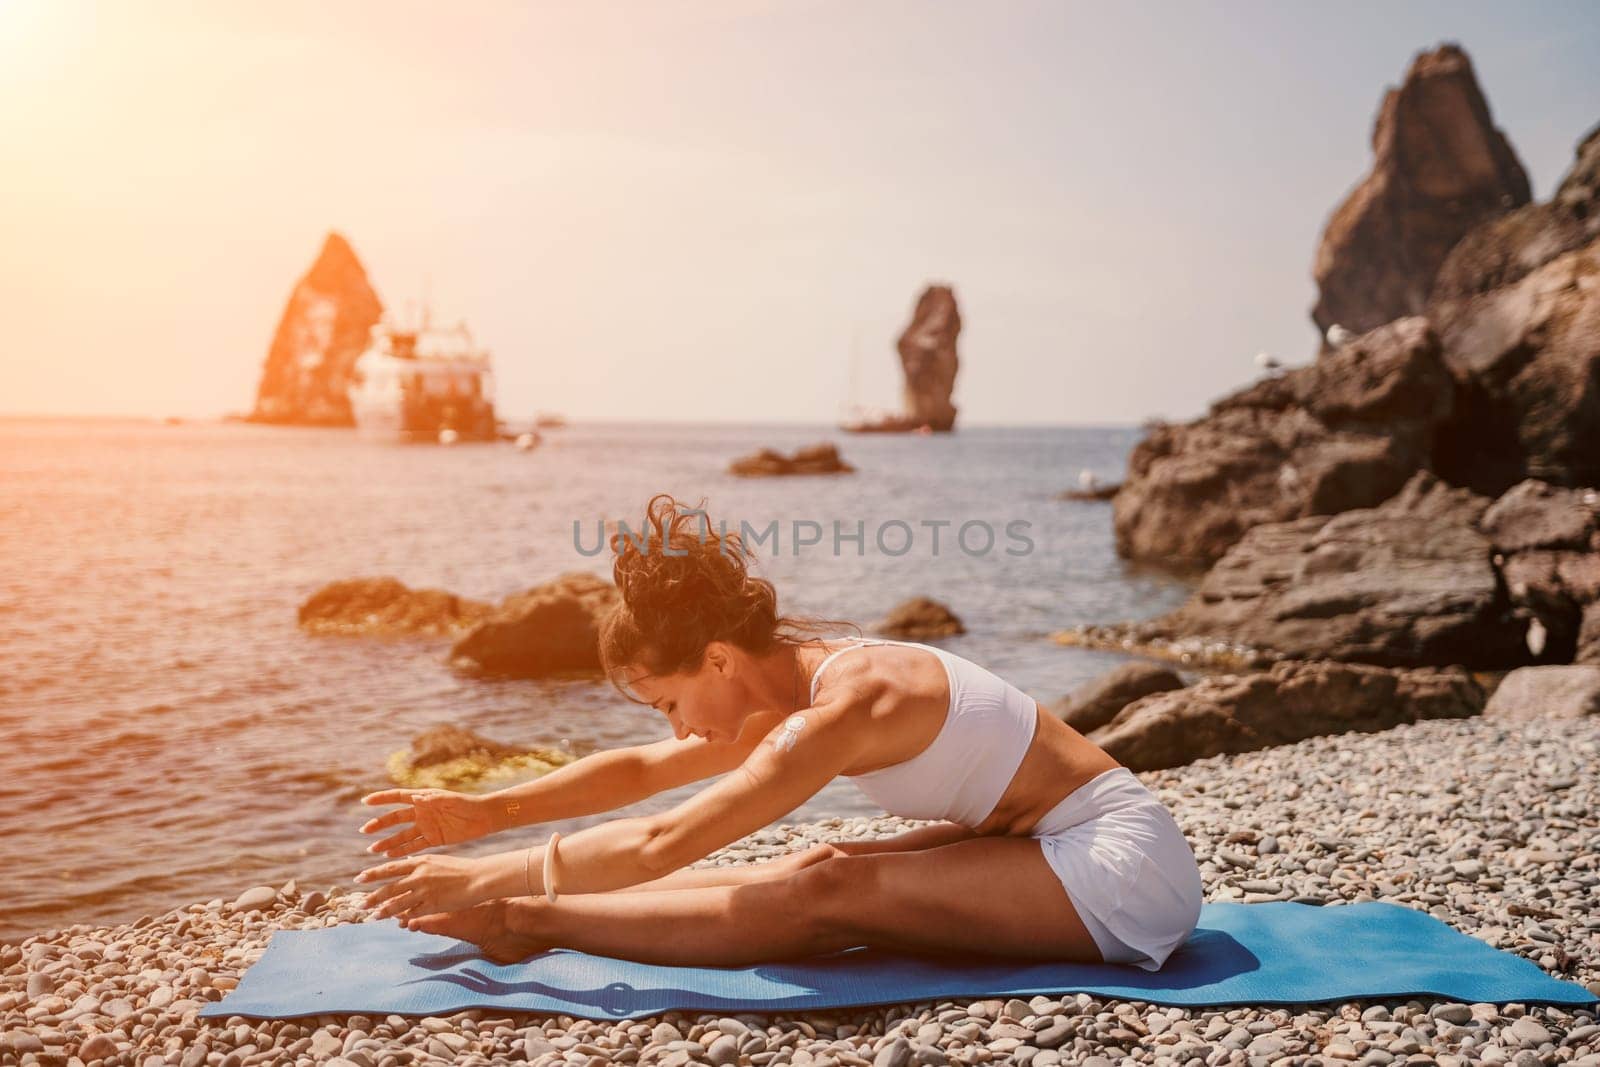 Woman sea yoga. Two Happy women meditating in yoga pose on the beach, ocean and rock mountains. Motivation and inspirational fit and exercising. Healthy lifestyle outdoors in nature, fitness concept. by panophotograph